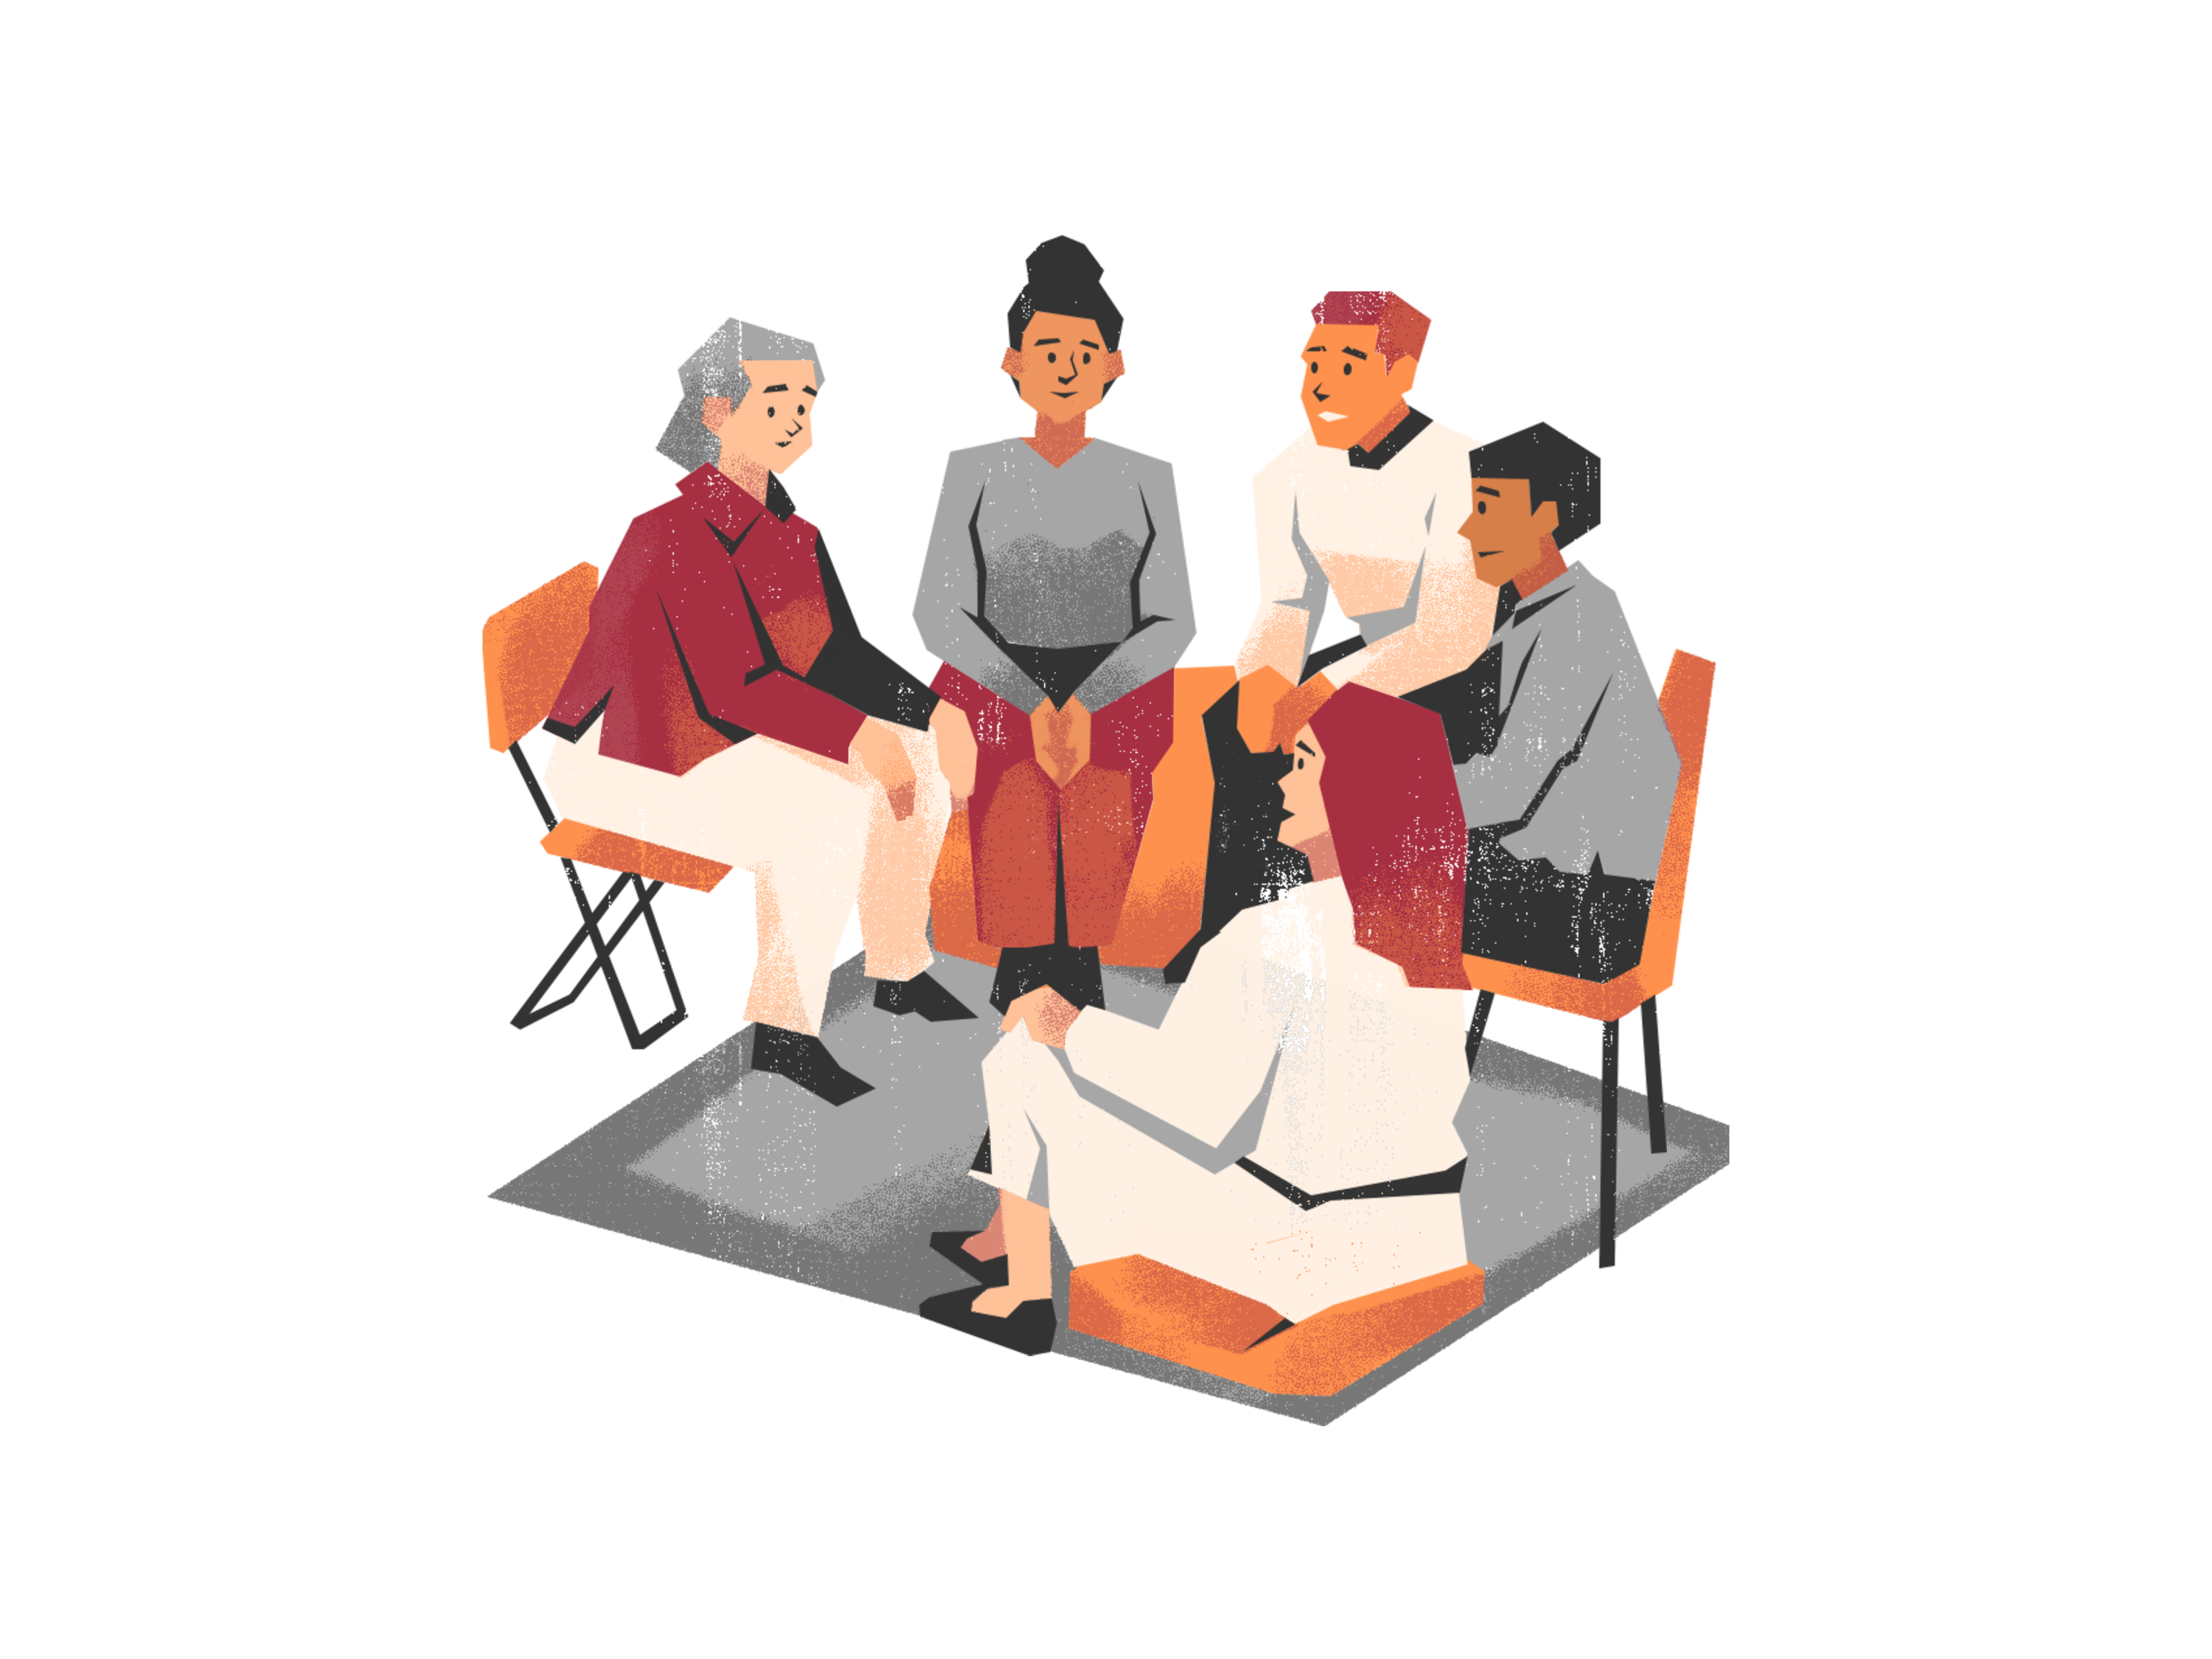 Animated graphic of group of people sitting in a circle and speaking with each other.